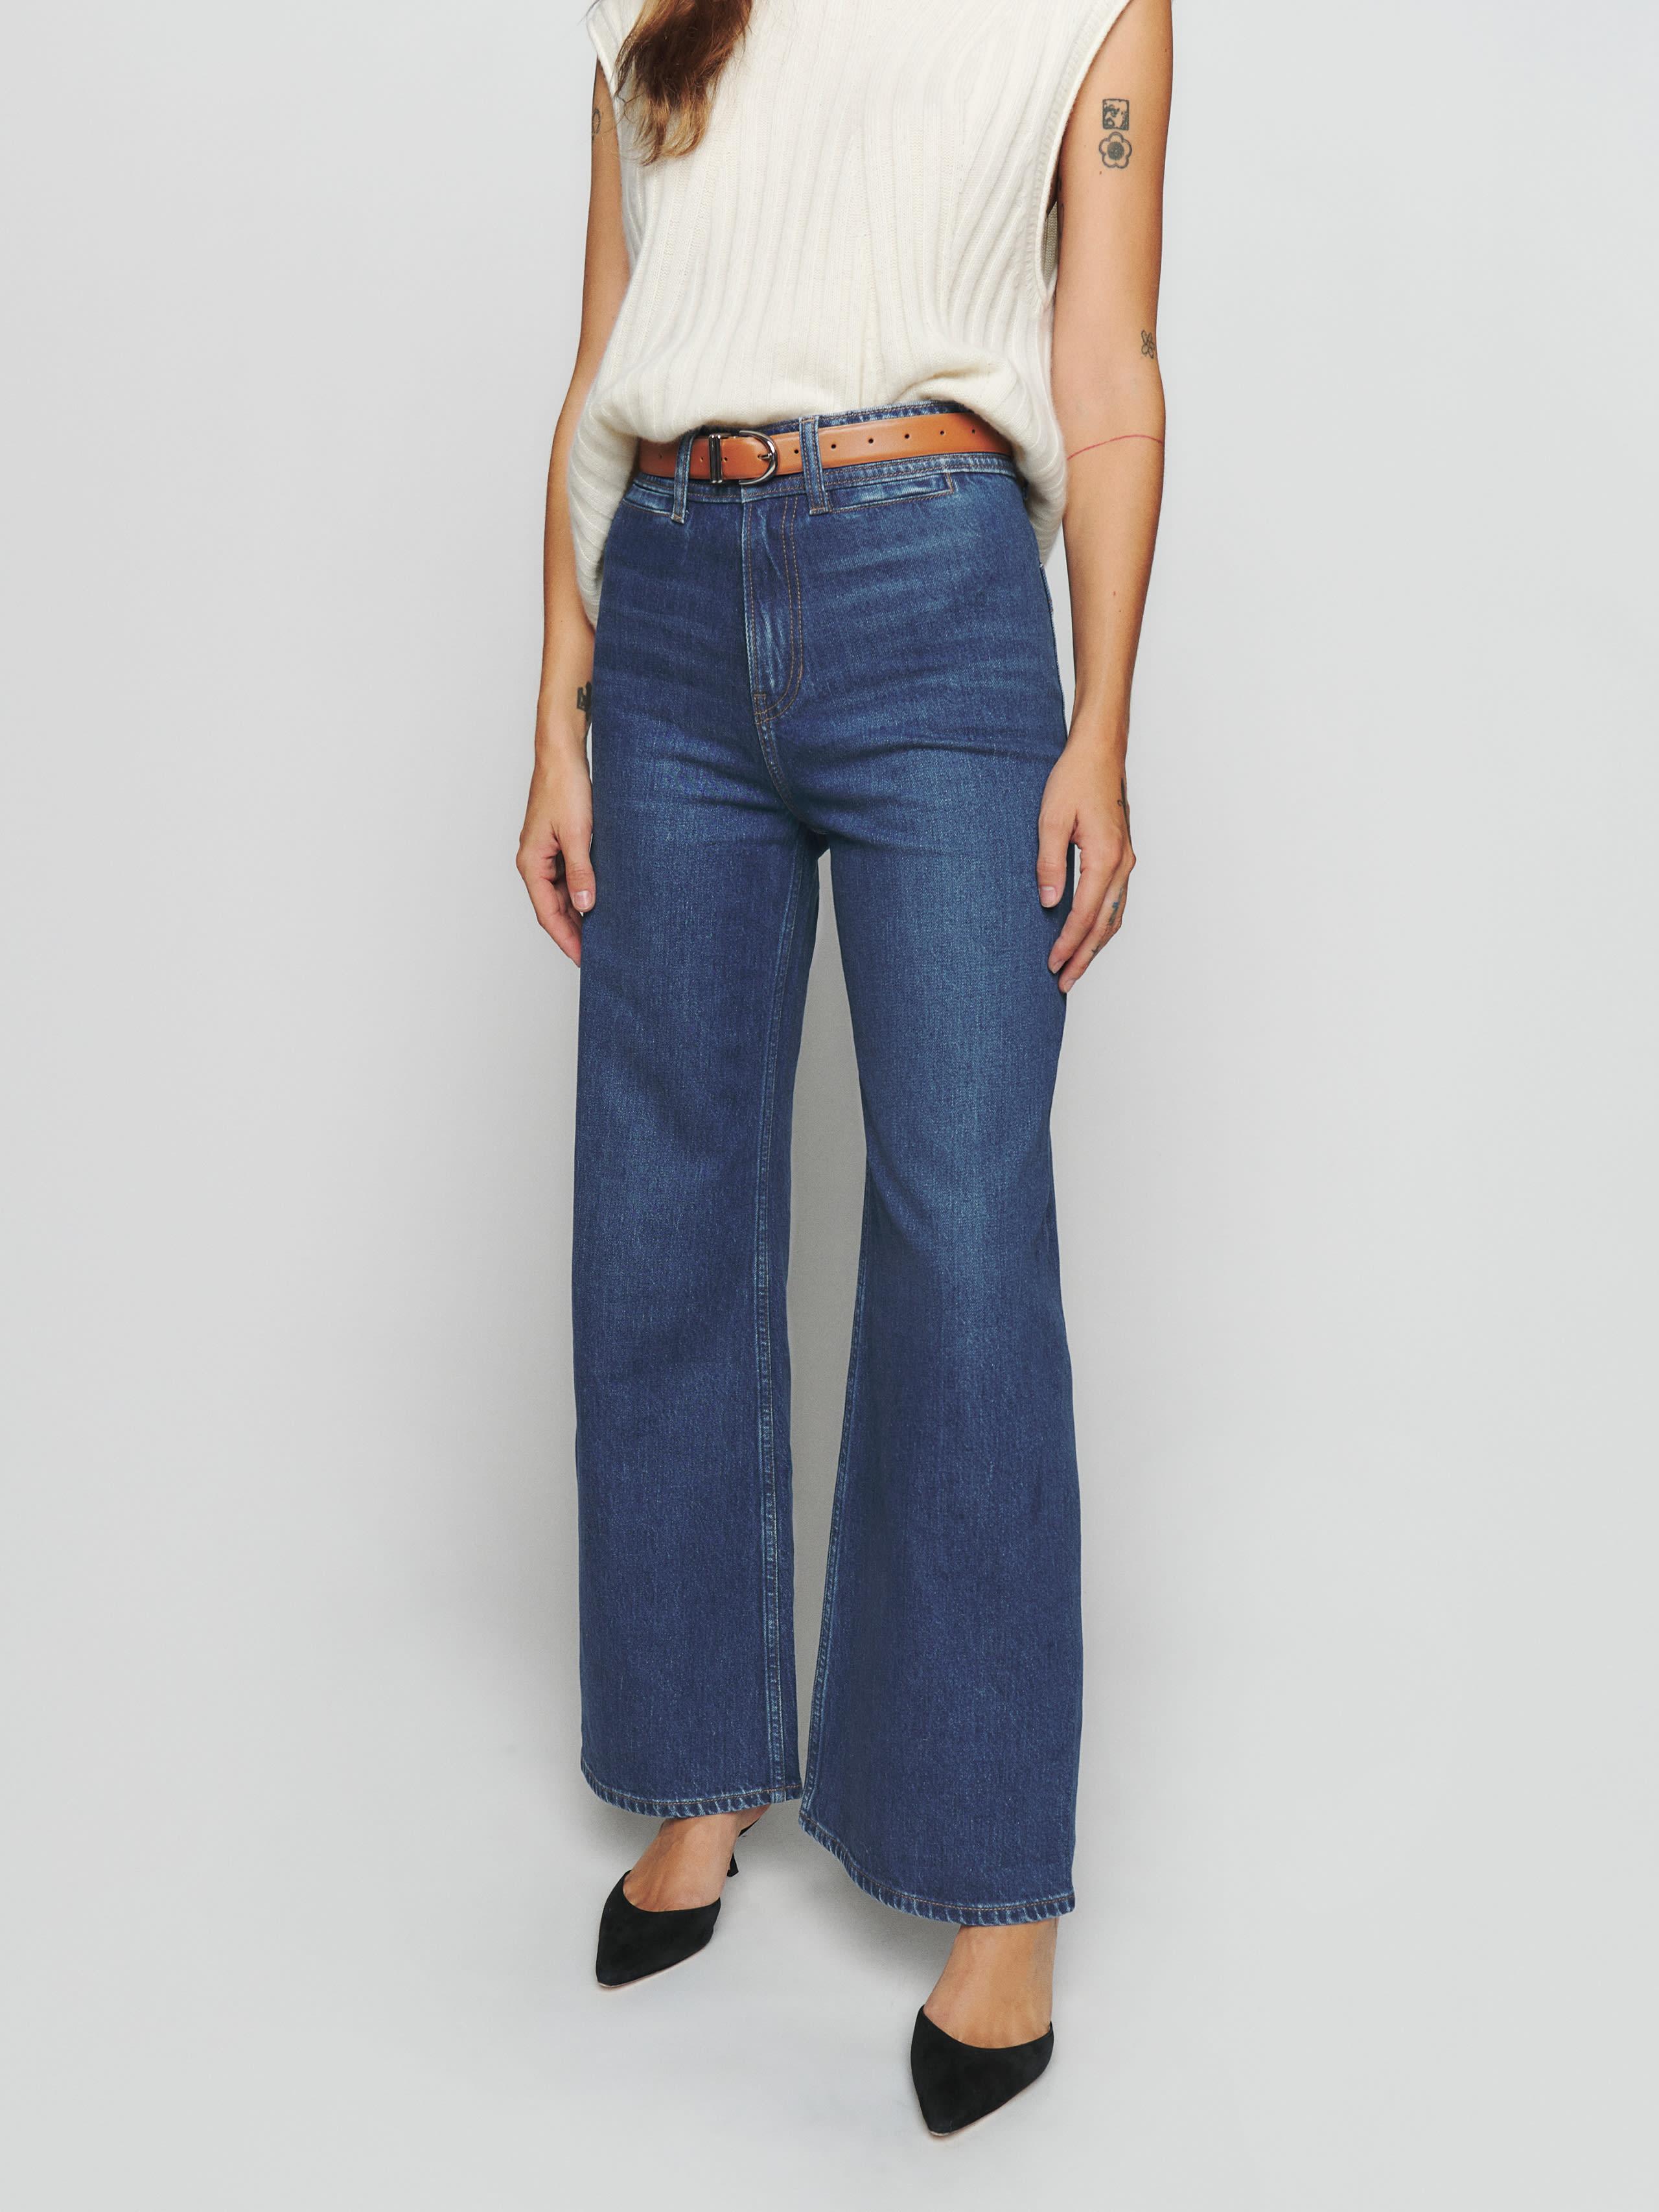 Reformation Thea High Rise Wide Leg Jeans in Blue | Lyst